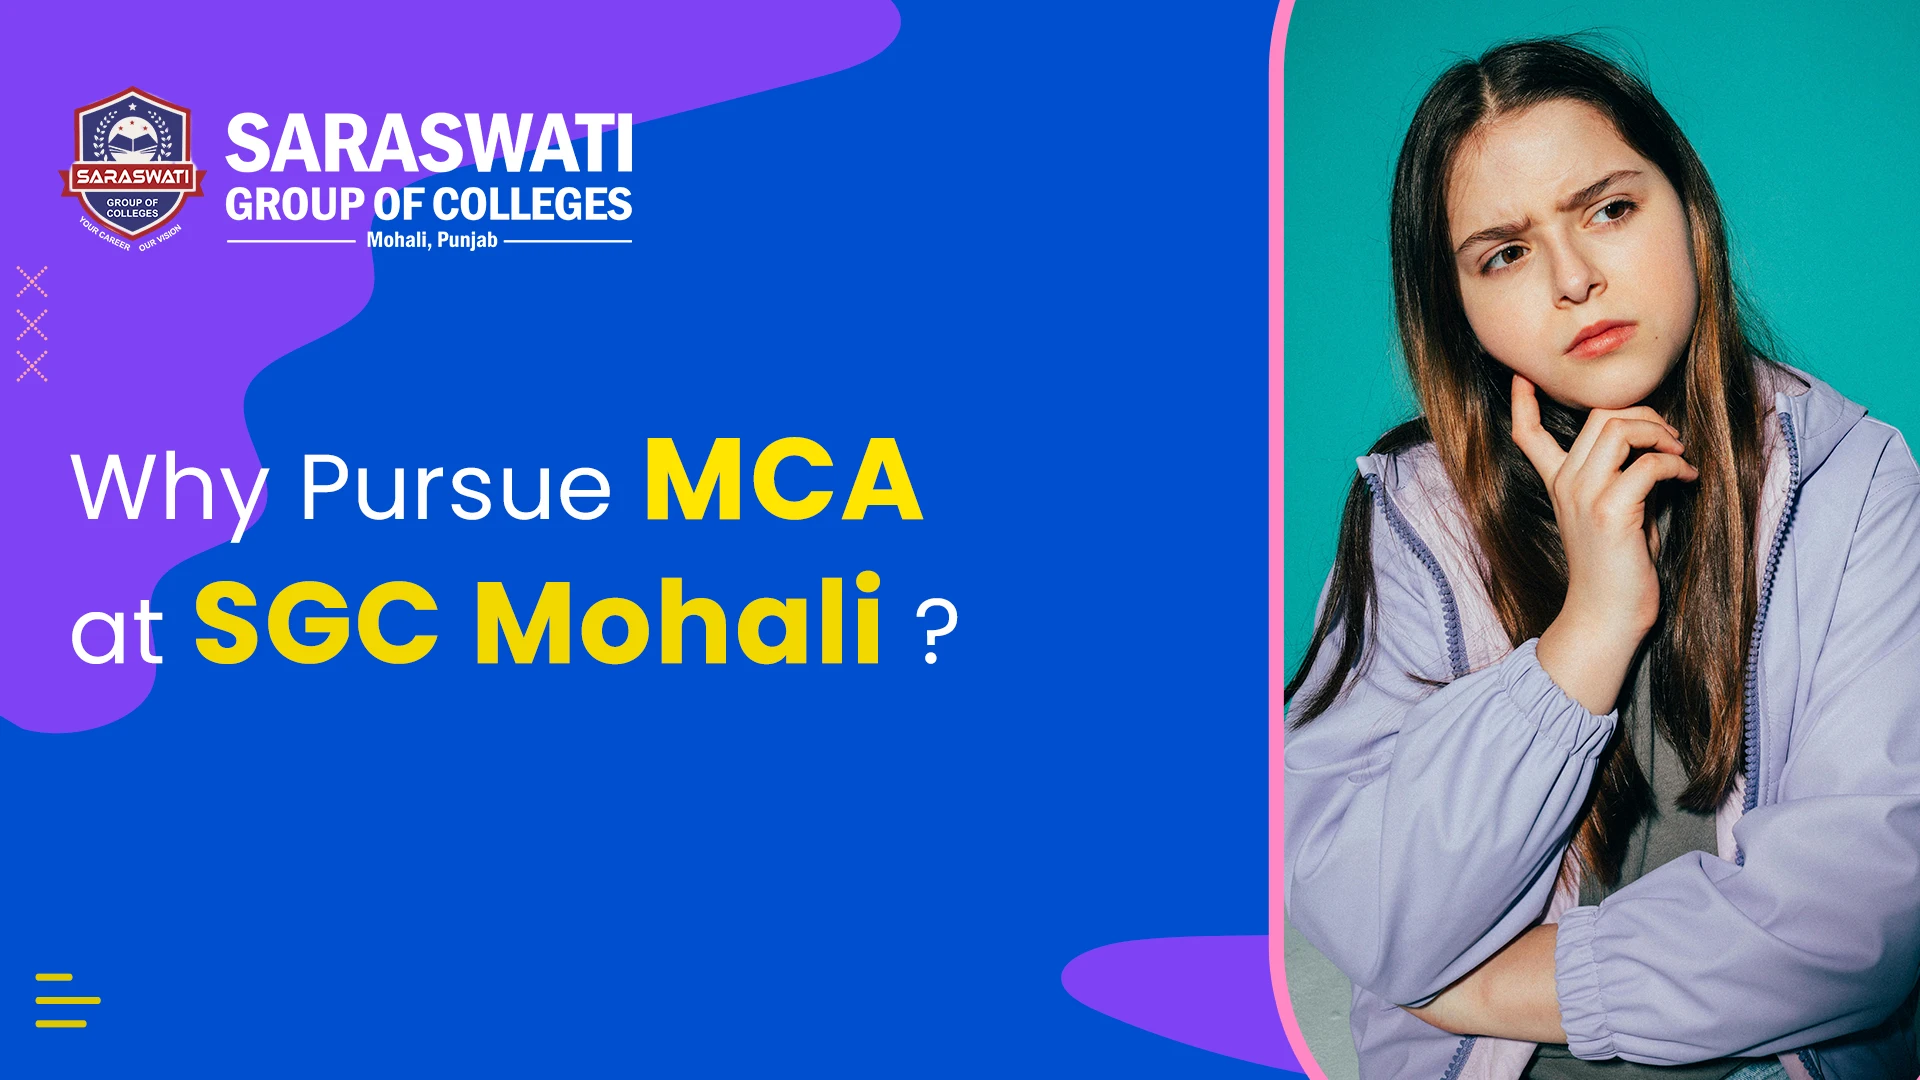 Launching Your Tech Career: Why Pursue MCA at SGC Mohali?